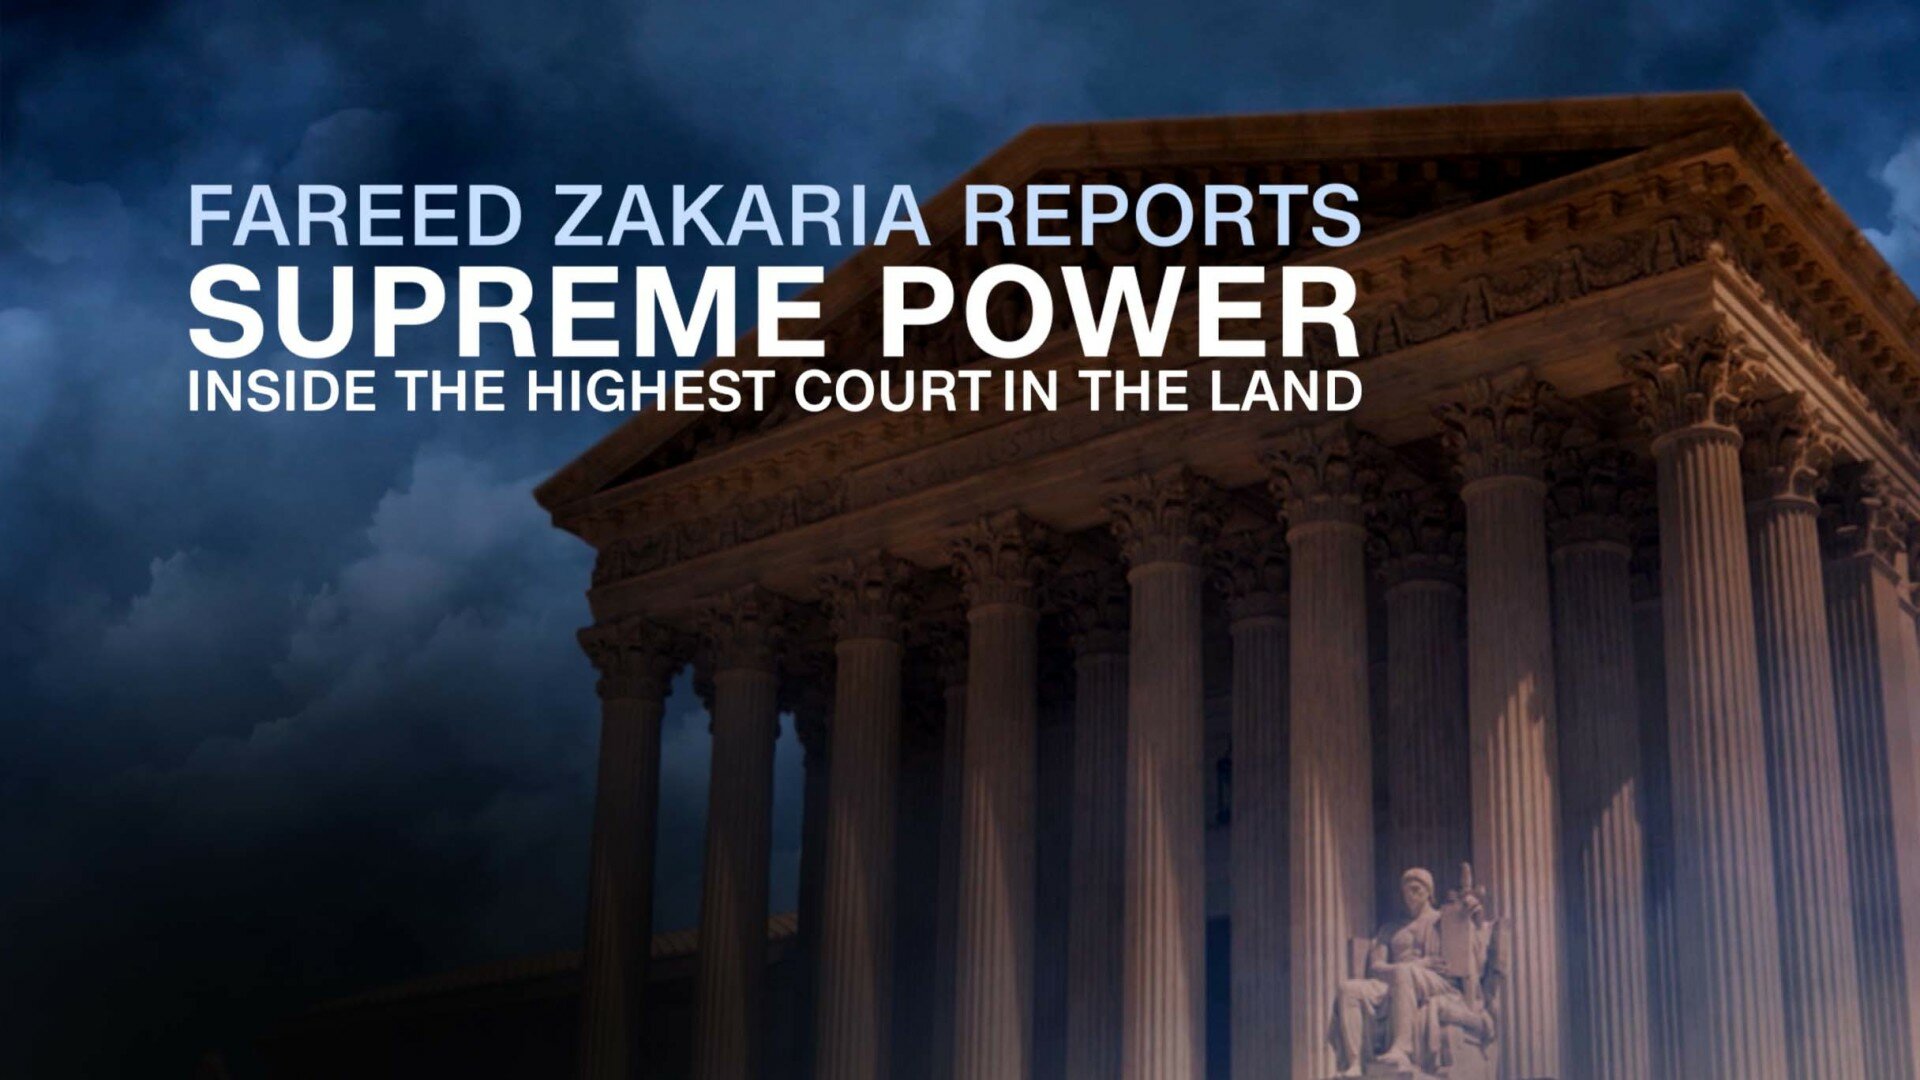 Supreme Power: Inside the Highest Court in the Land A Fareed Zakaria